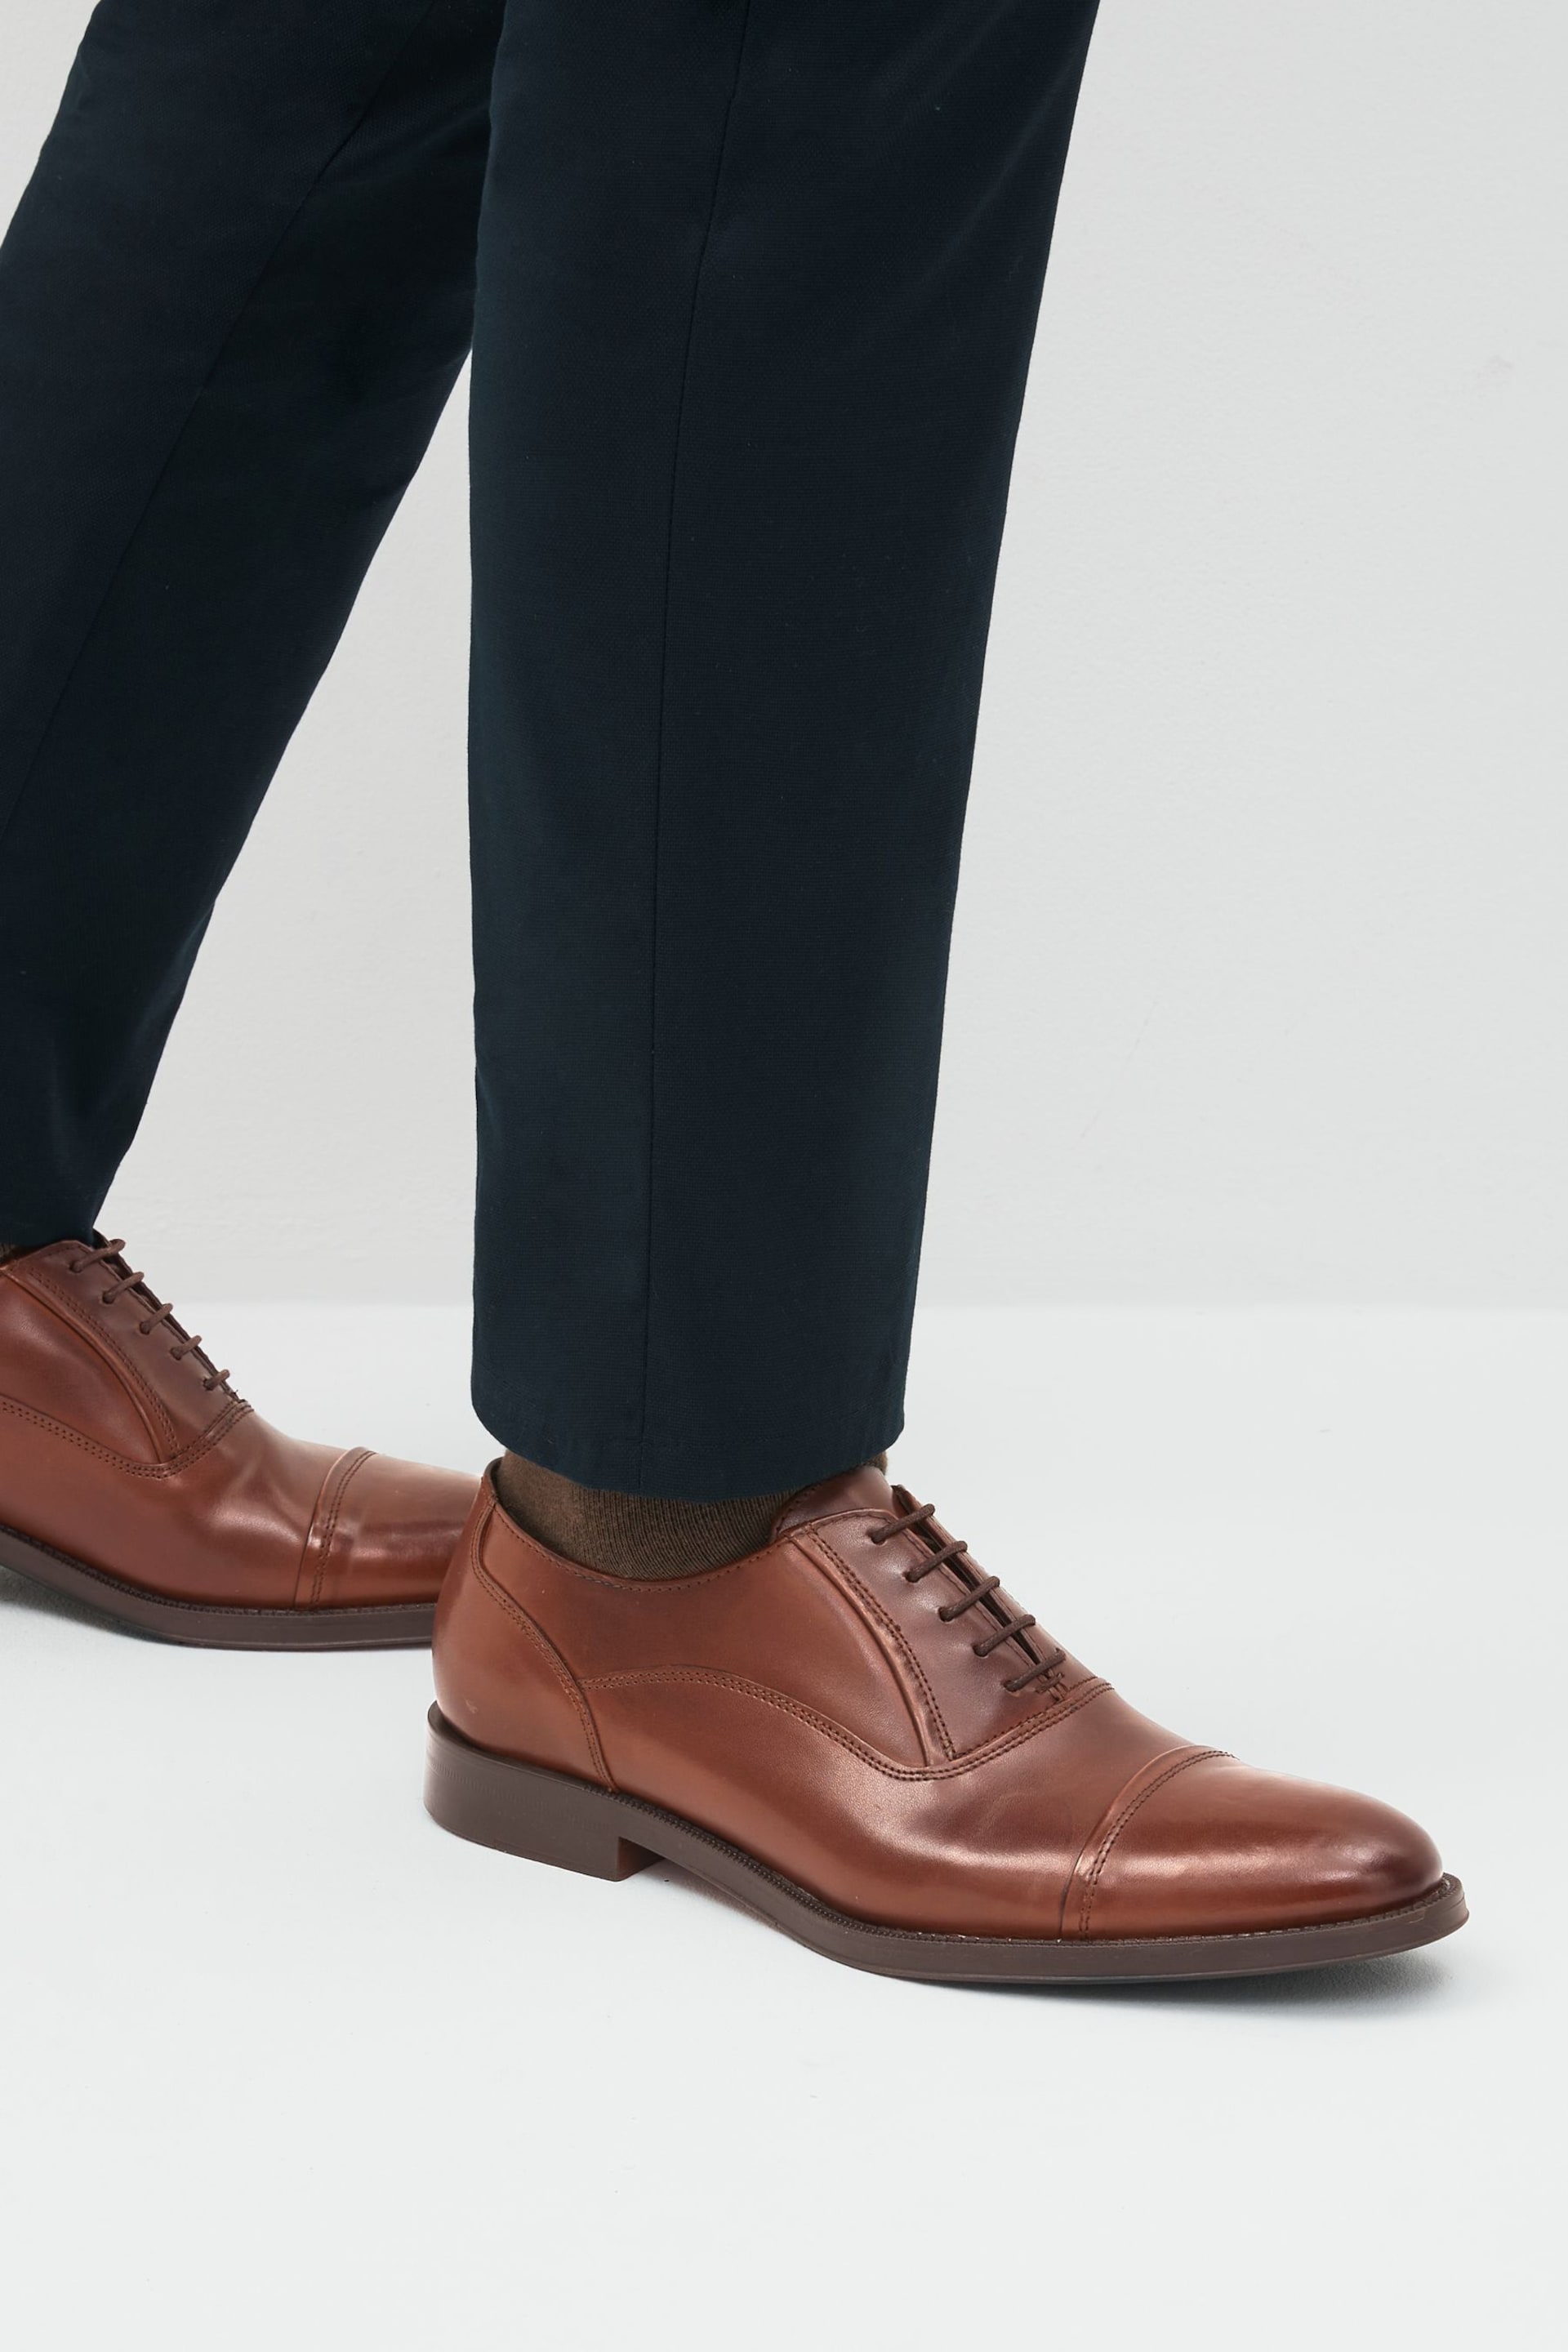 Brown Leather Oxford Toecap Shoes - Image 1 of 6